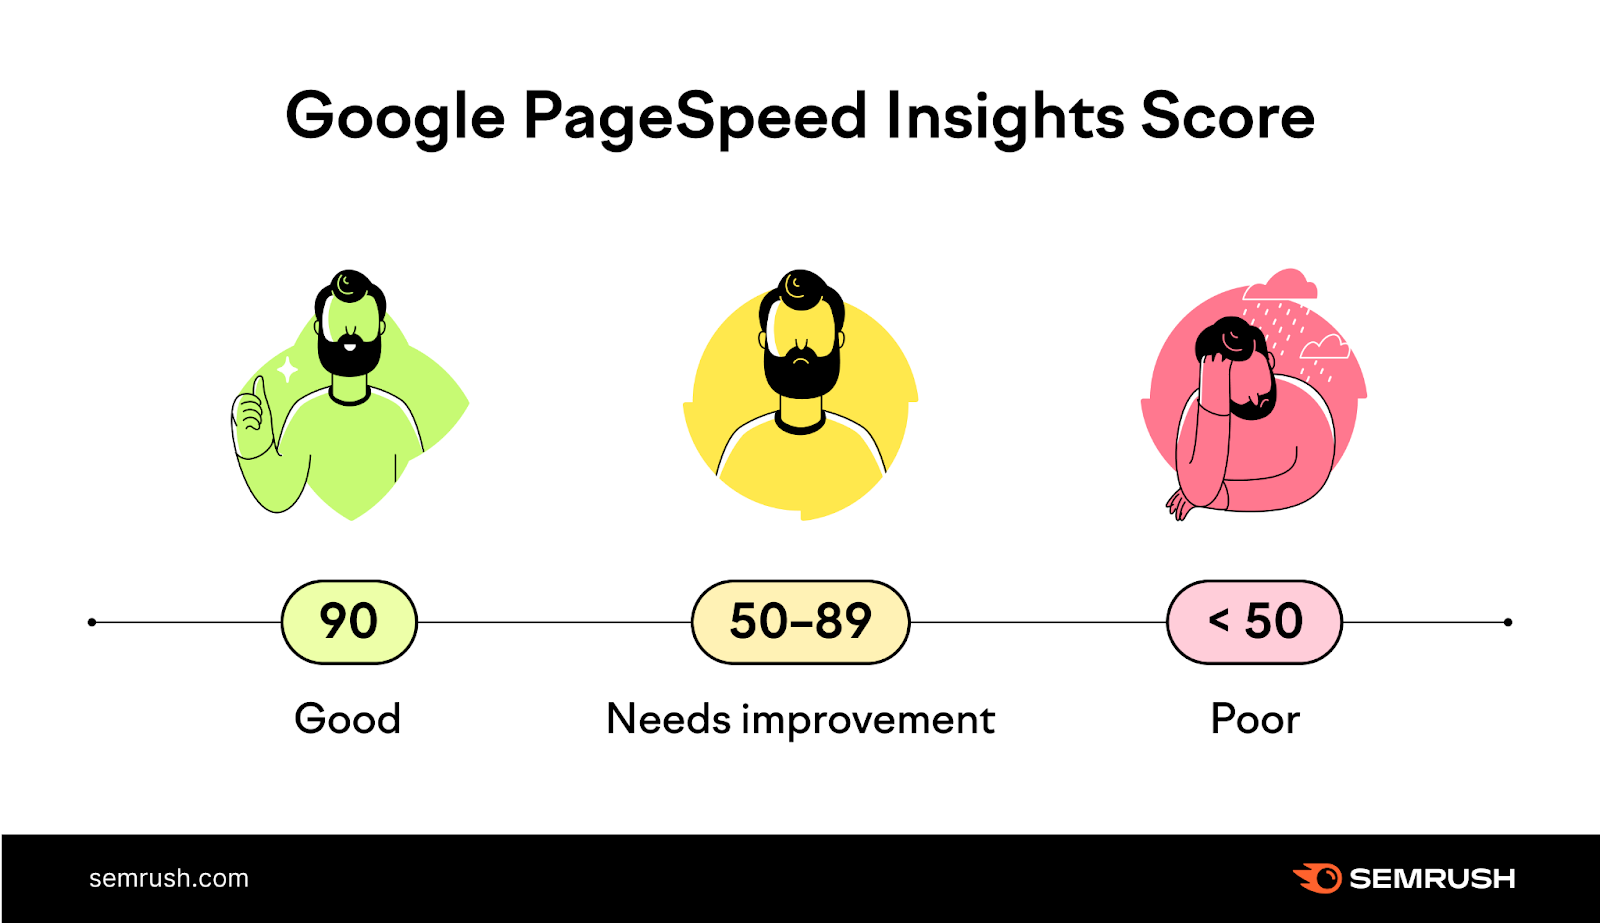 an infographic showing Google PageSpeed insights scores for "good" "needs improvement" and "poor"